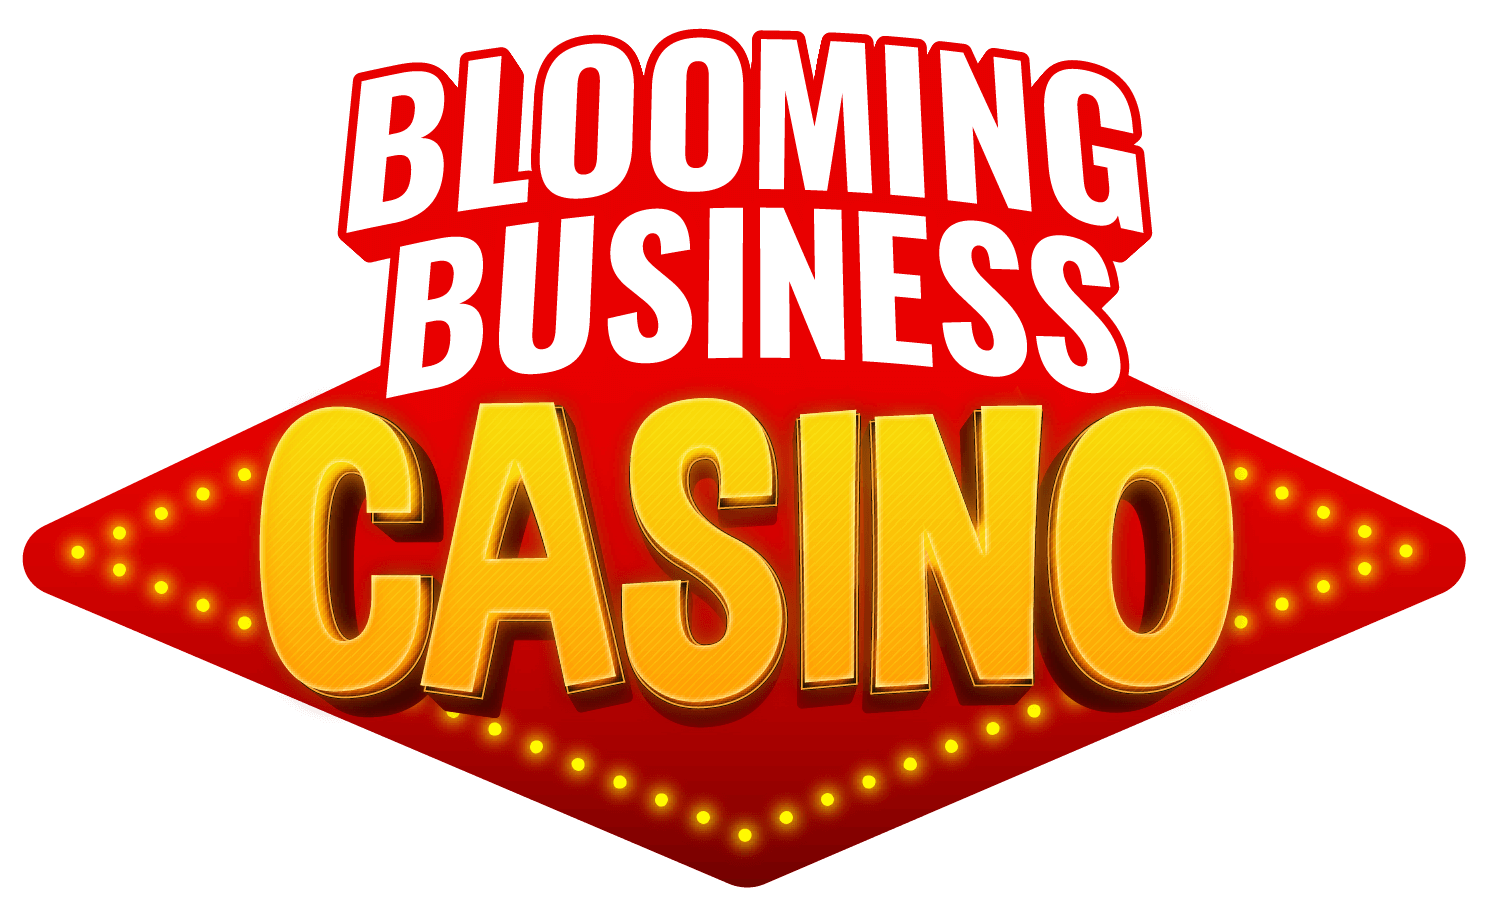 Video: Blooming Business: Casino launch trailer